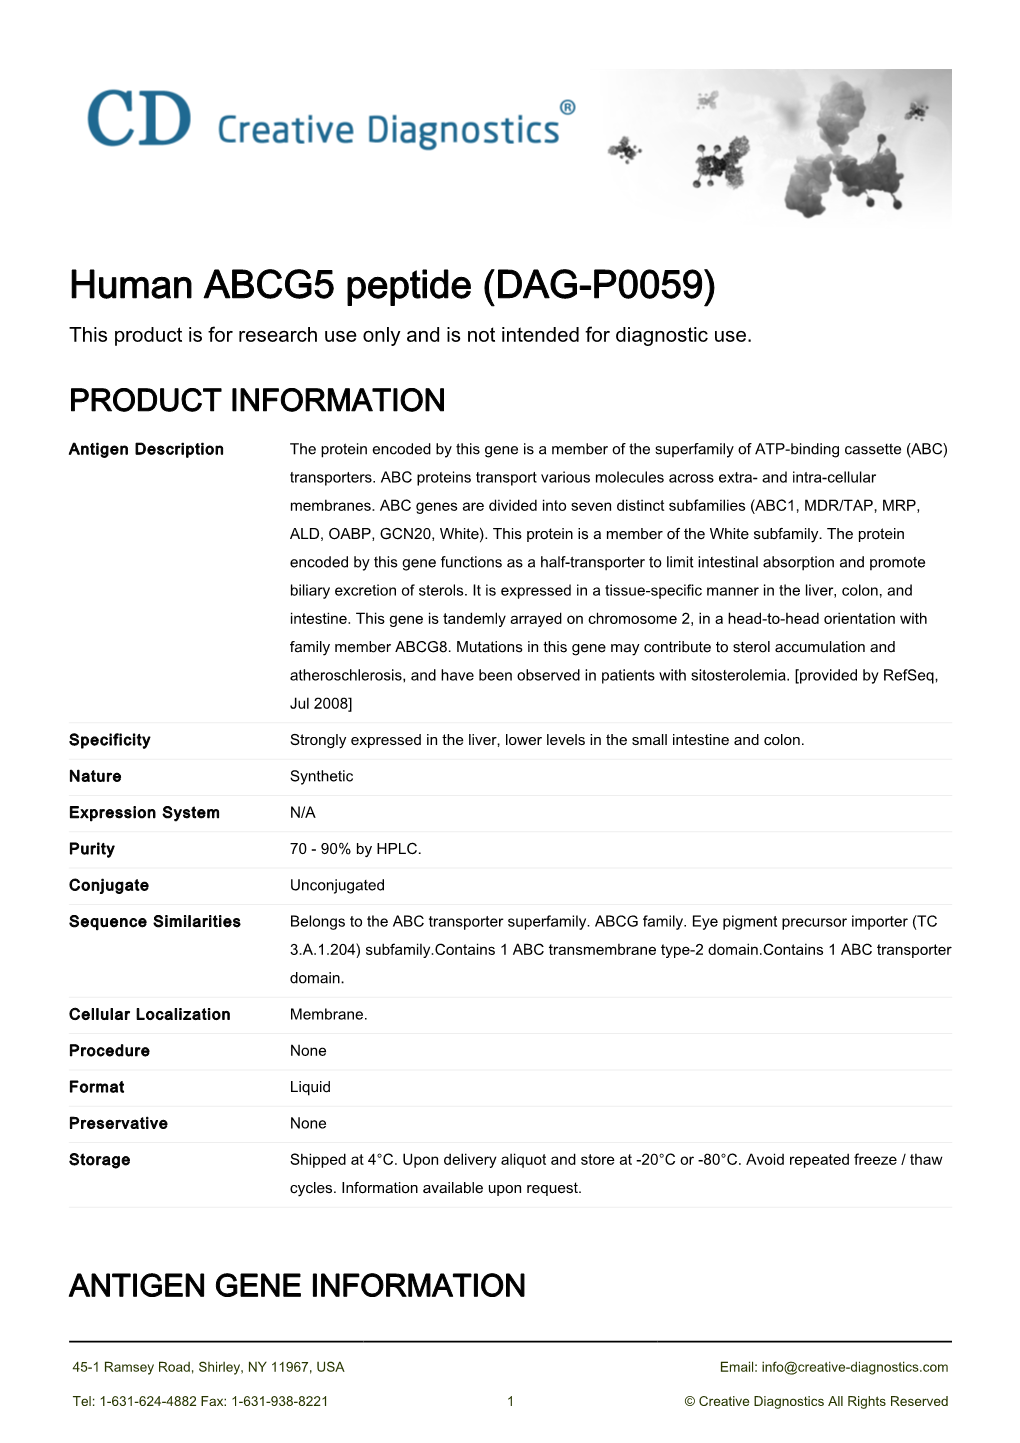 Human ABCG5 Peptide (DAG-P0059) This Product Is for Research Use Only and Is Not Intended for Diagnostic Use